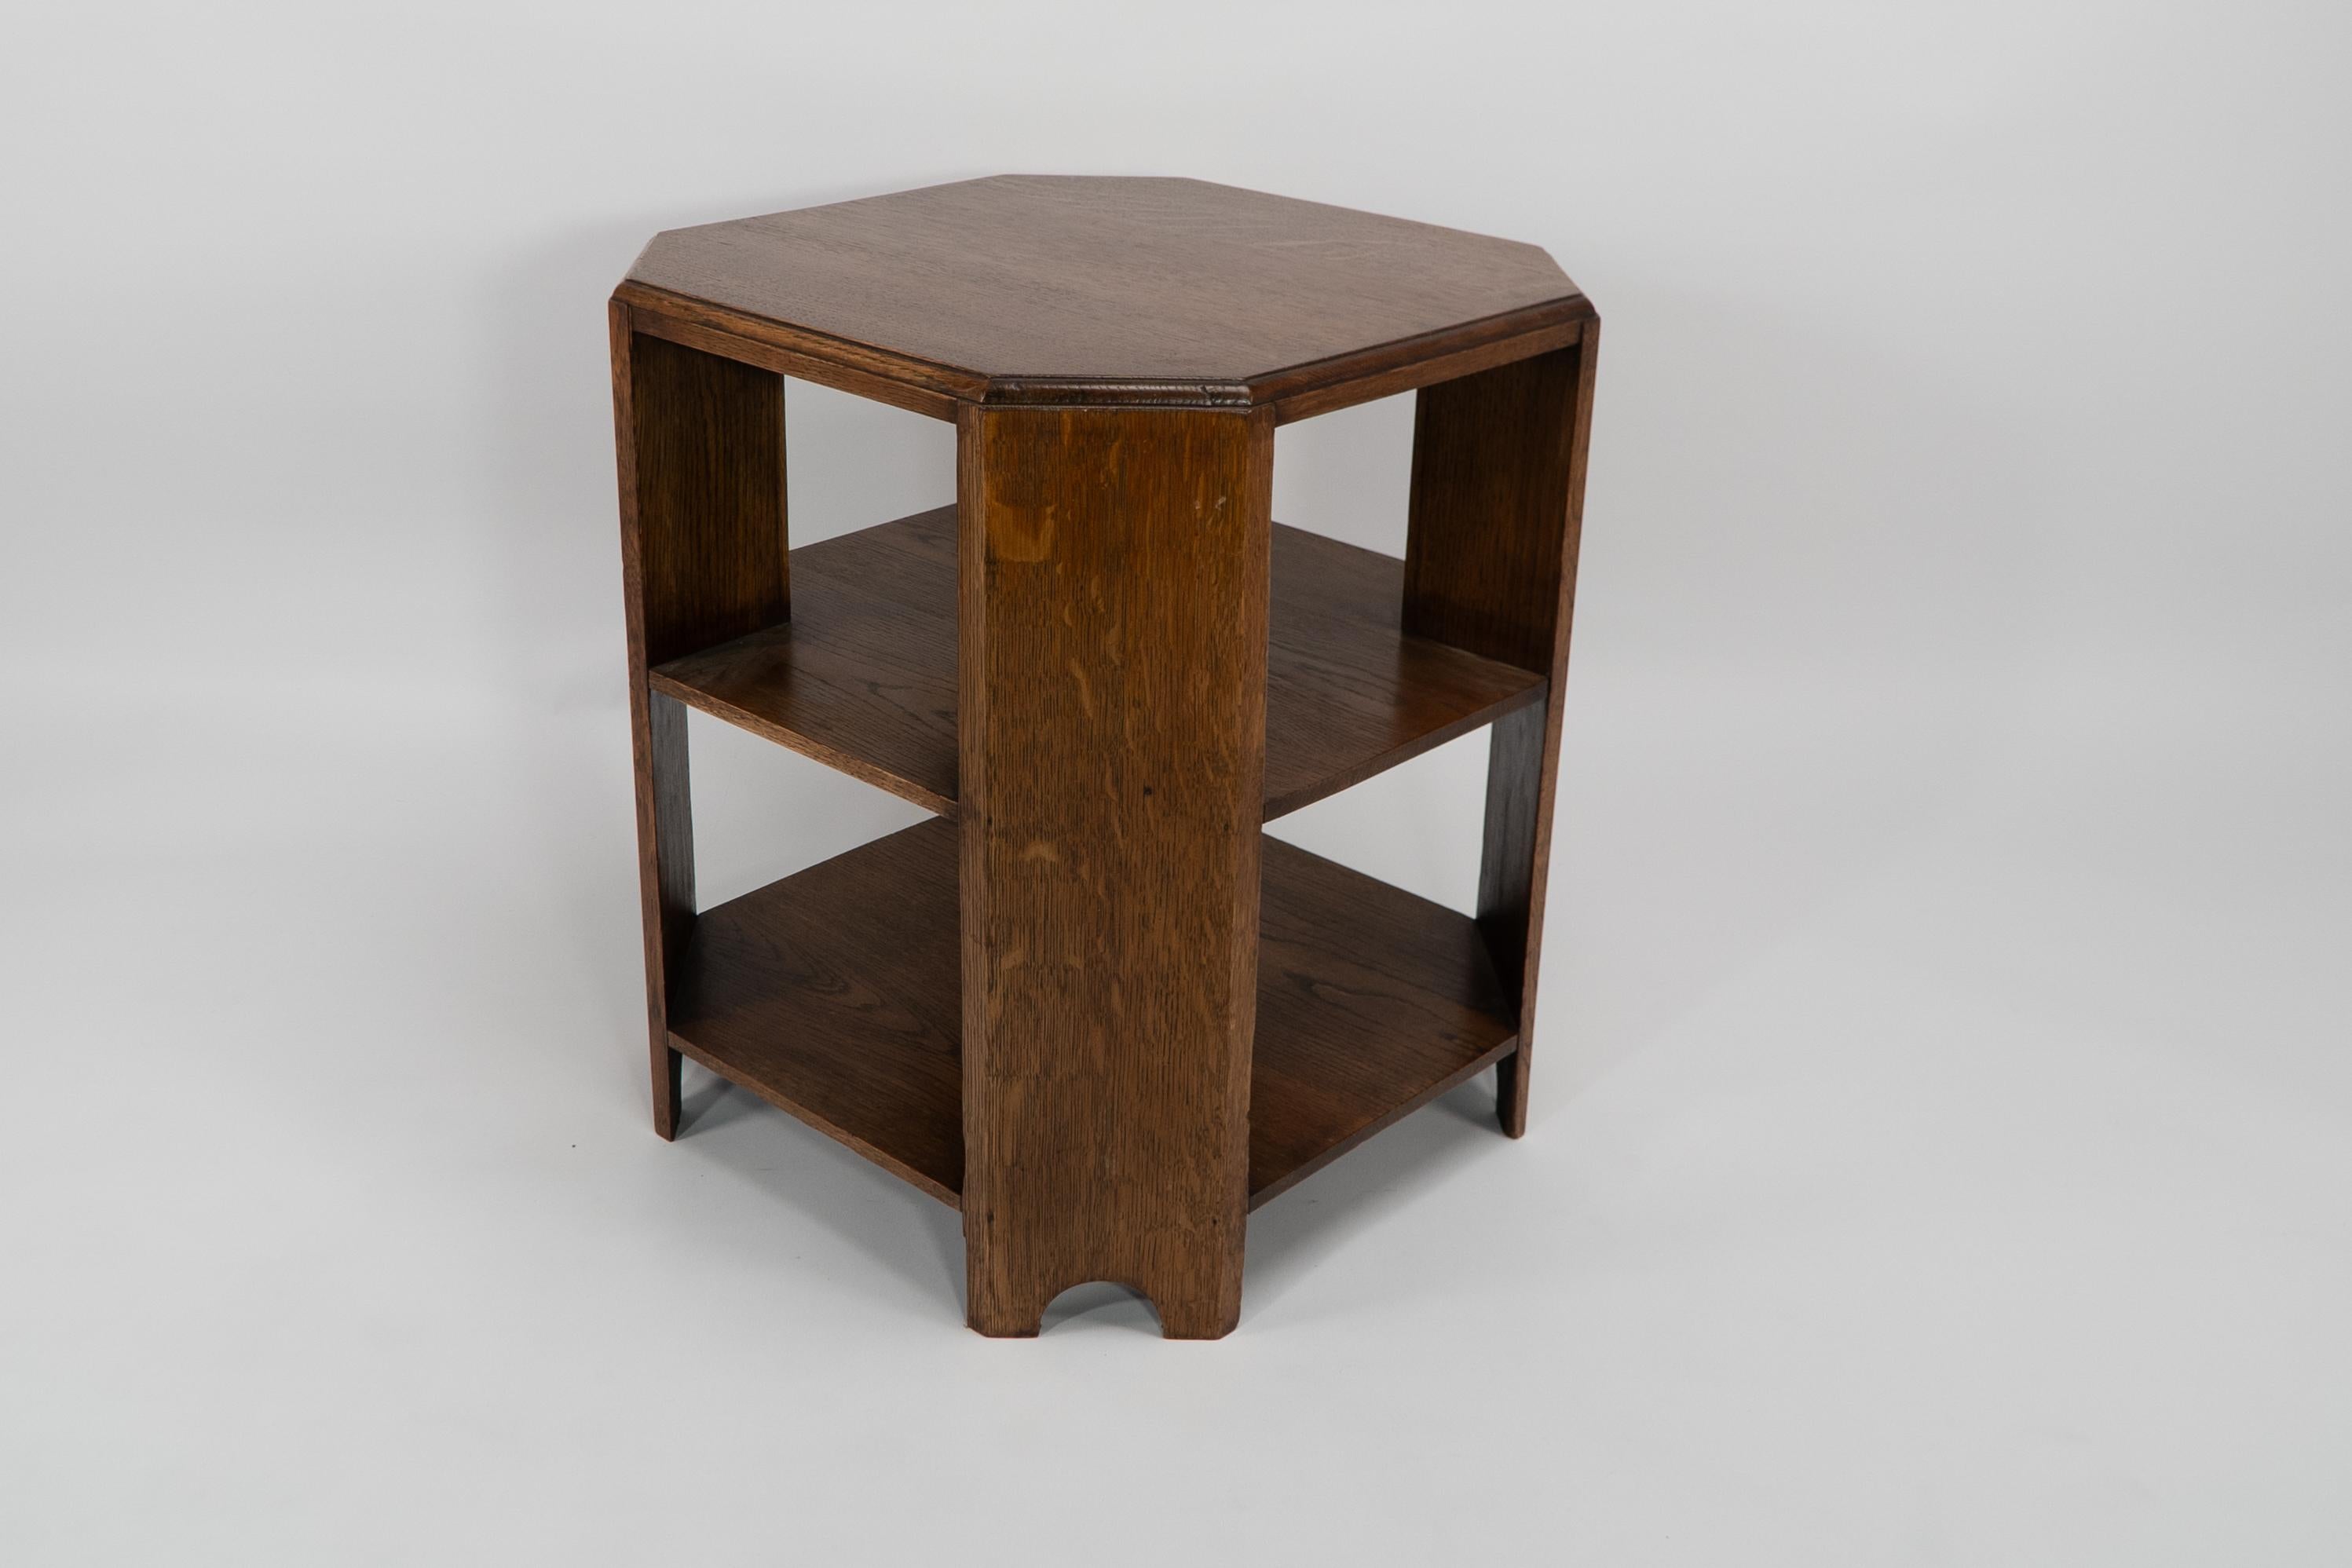 Heals. An Arts and Crafts oak octagonal book-reading coffee or side table with open compartments below to store books or papers.